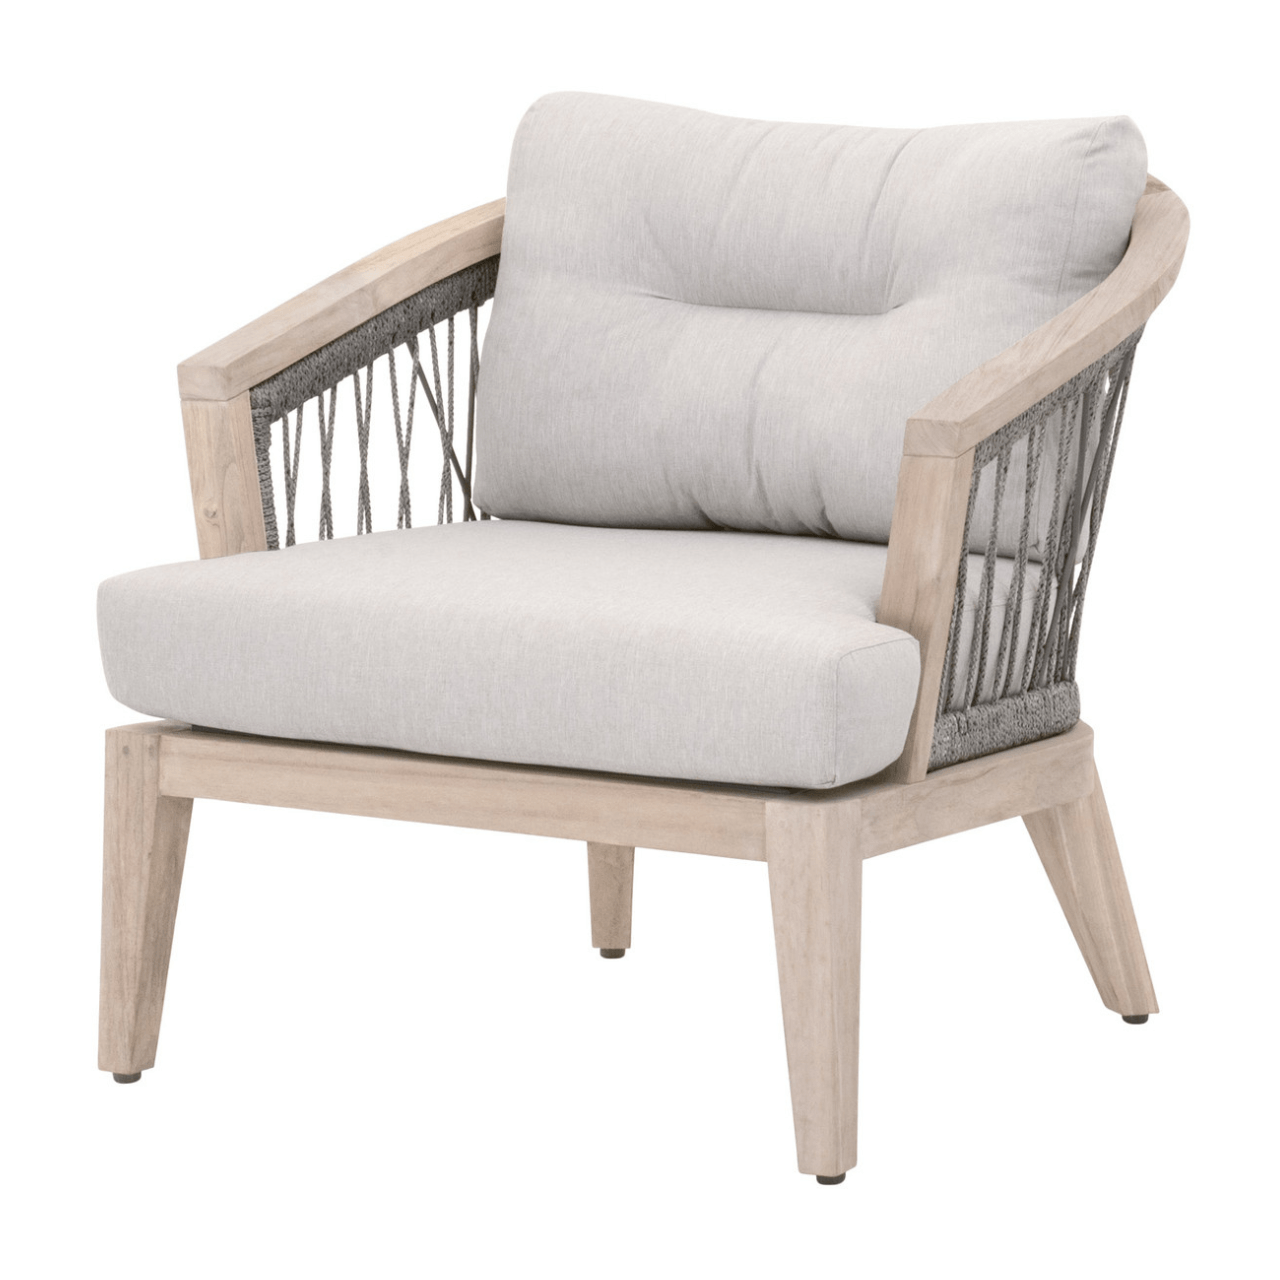 Woven Web Outdoor Club Chair